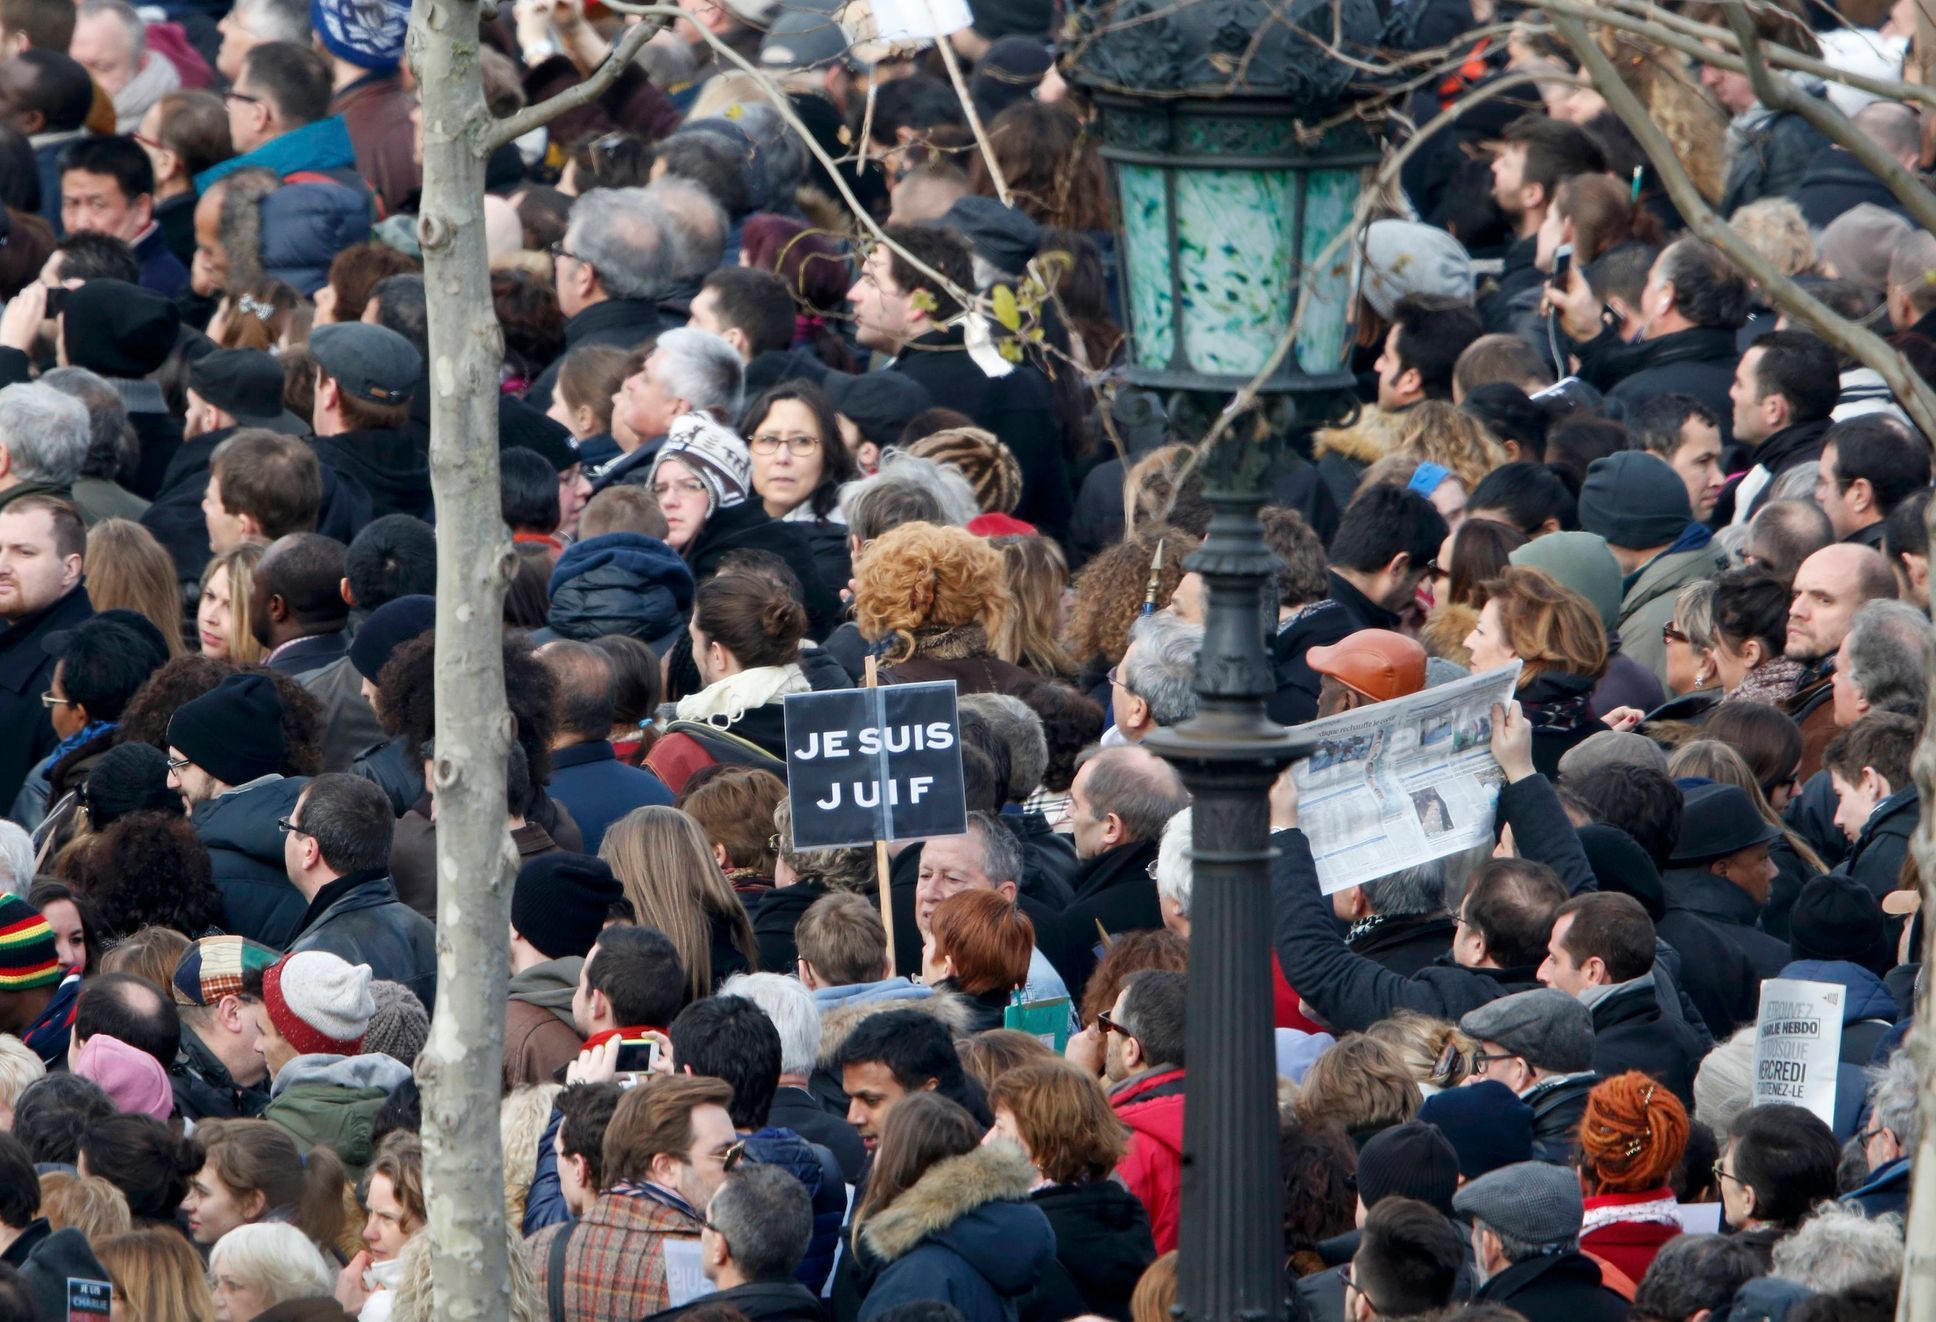 People gather on the Place de la Republique to attend the solidarity march in the streets of Paris